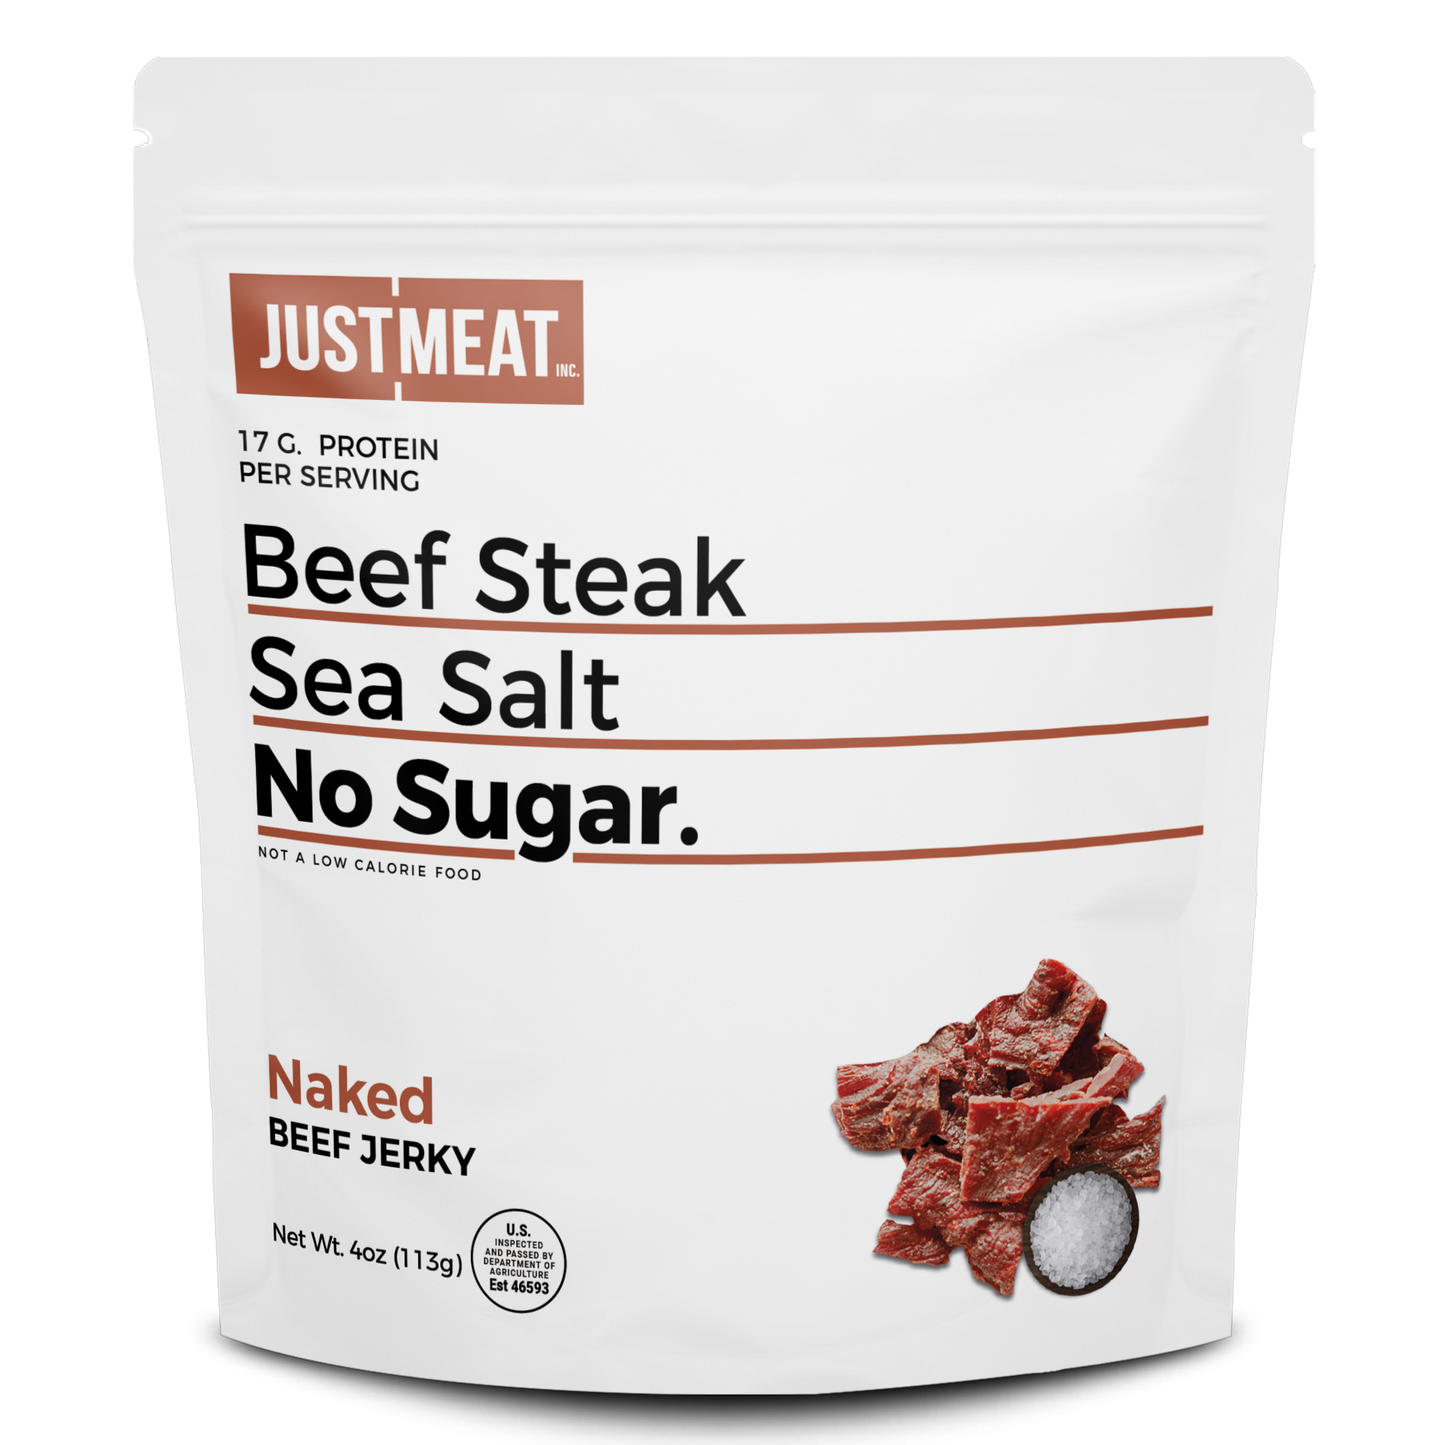 Naked Beef Jerky / 1 by JUSTMEAT